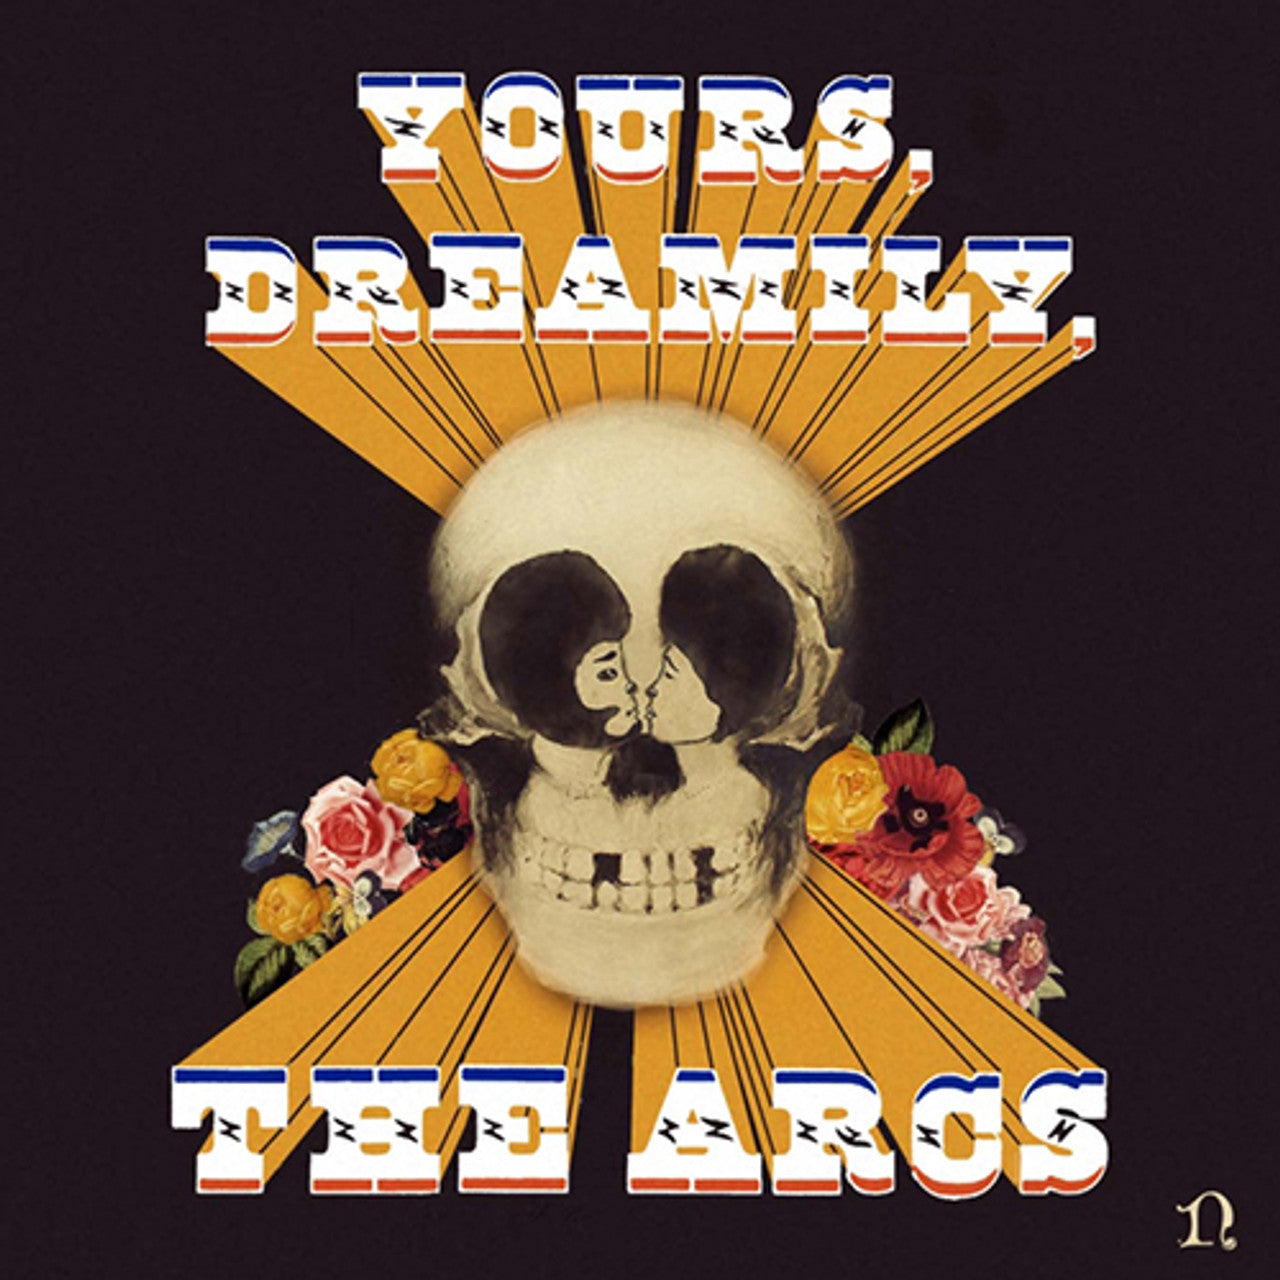 THE ARCS - YOURS DREAMILY -  VINYL LP - Wah Wah Records